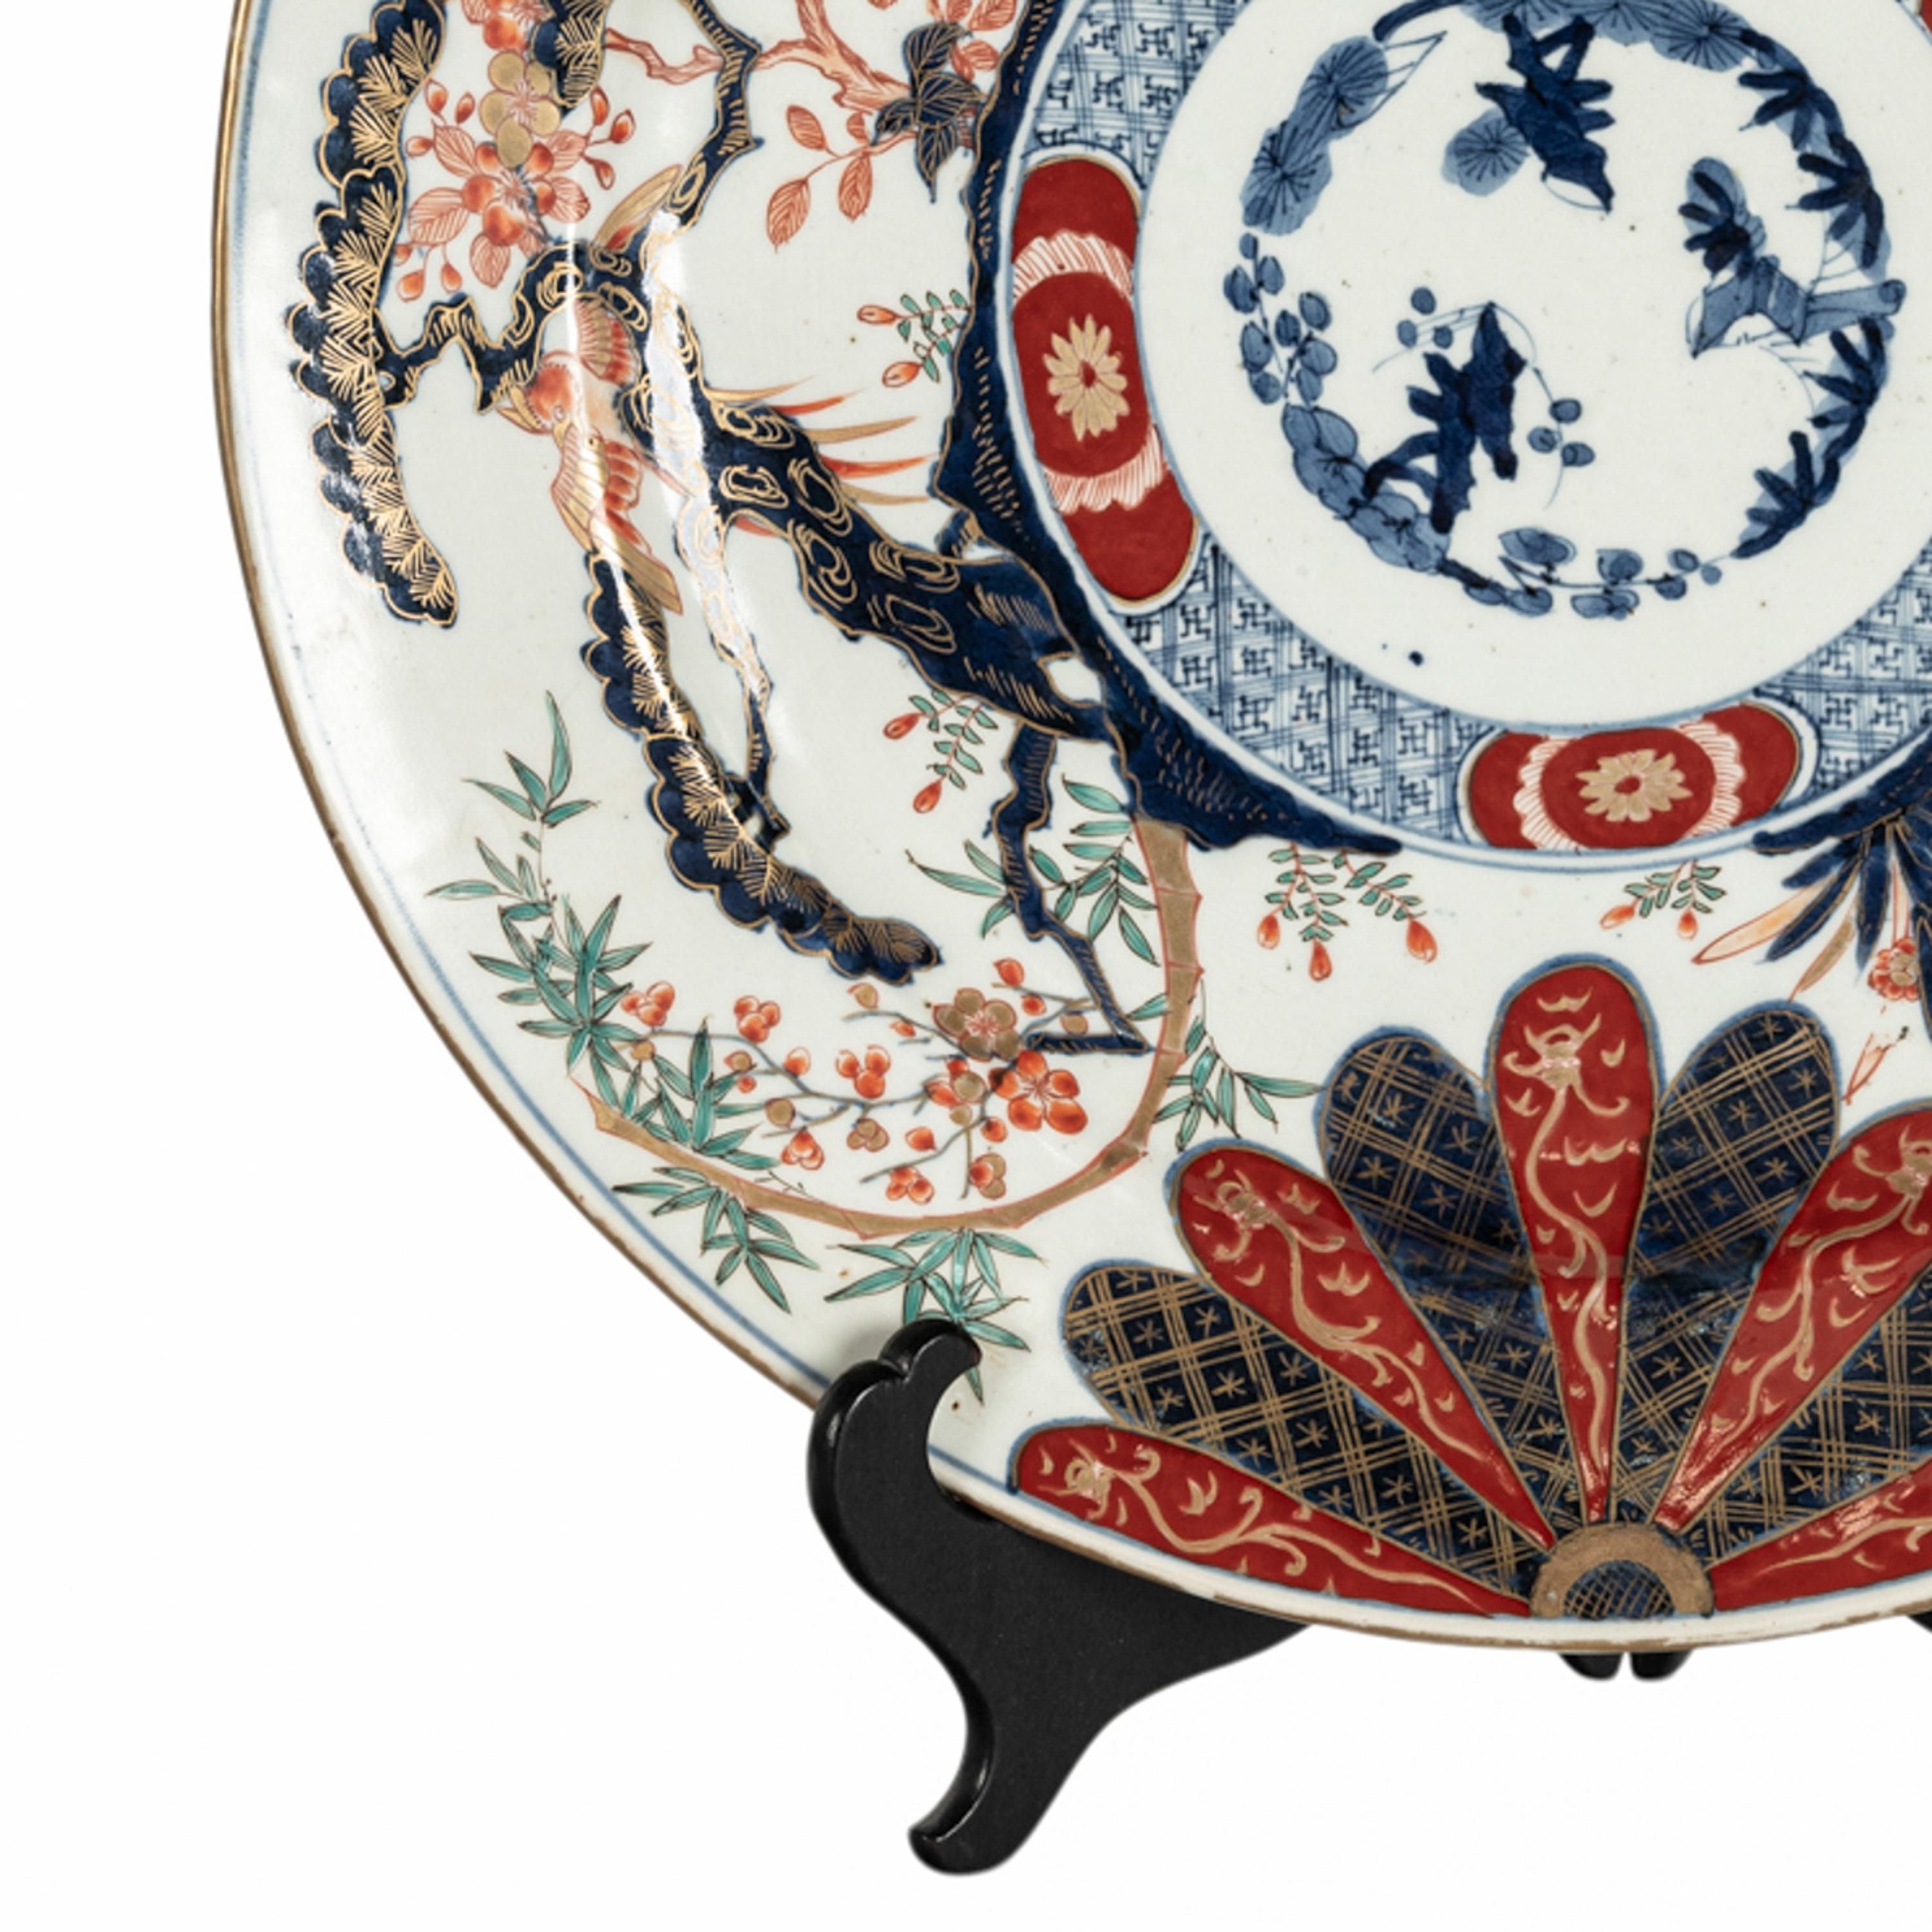 Monumental Antique Japanese Meiji Period Imari Porcelain Charger Plate 1880 For Sale 5